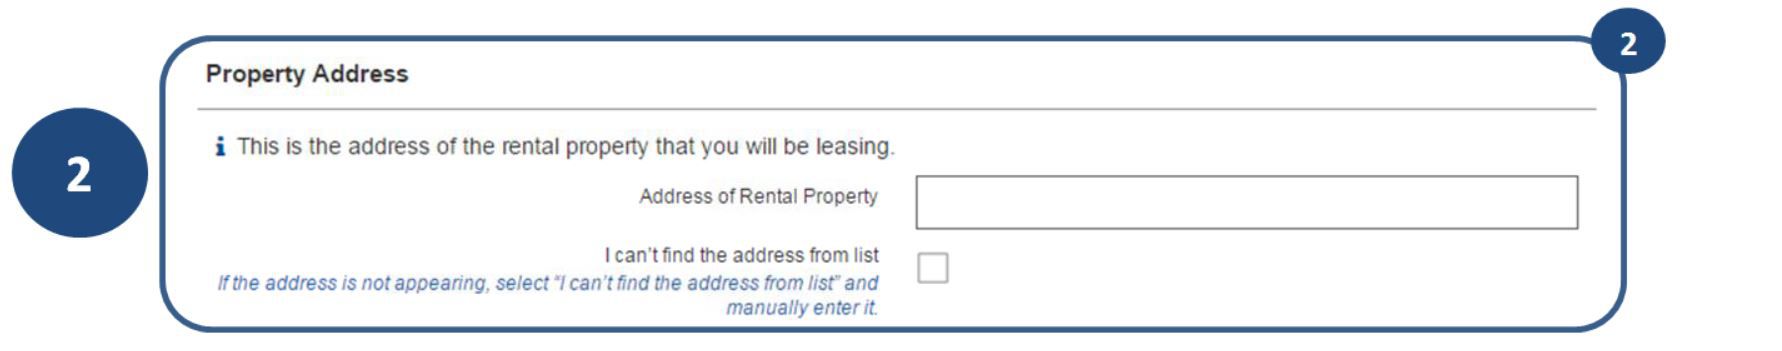 2. Enter the address of the property you will be renting